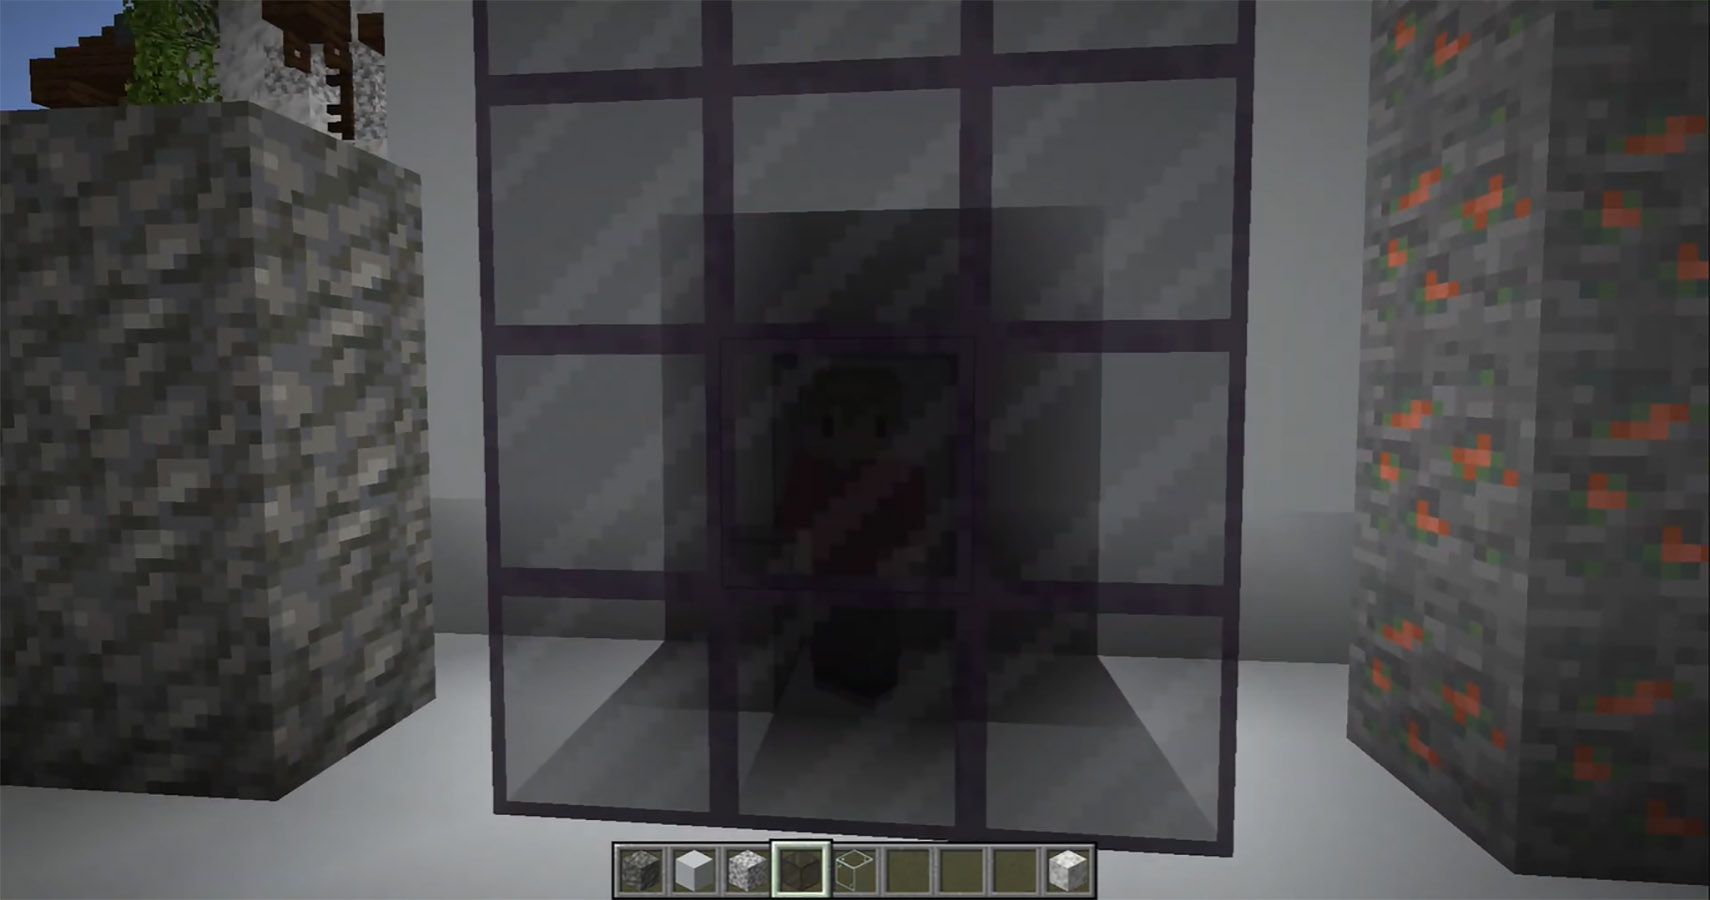 A demonstration of tinted glass's affect by YouTuber 